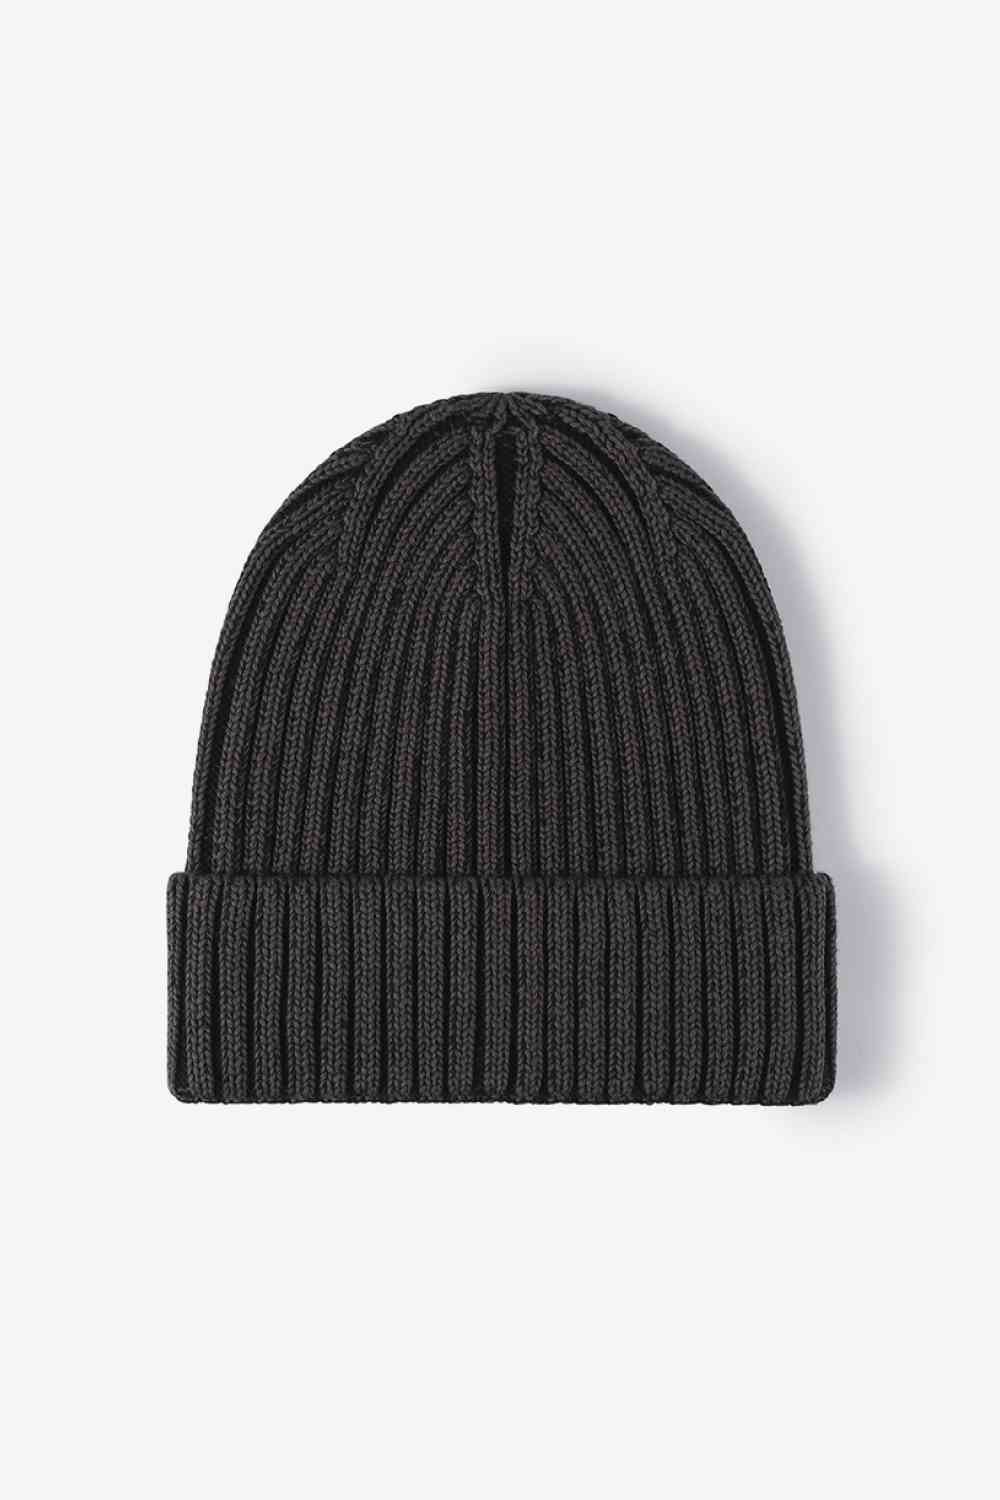 White Smoke Soft and Comfortable Cuffed Beanie Winter Accessories